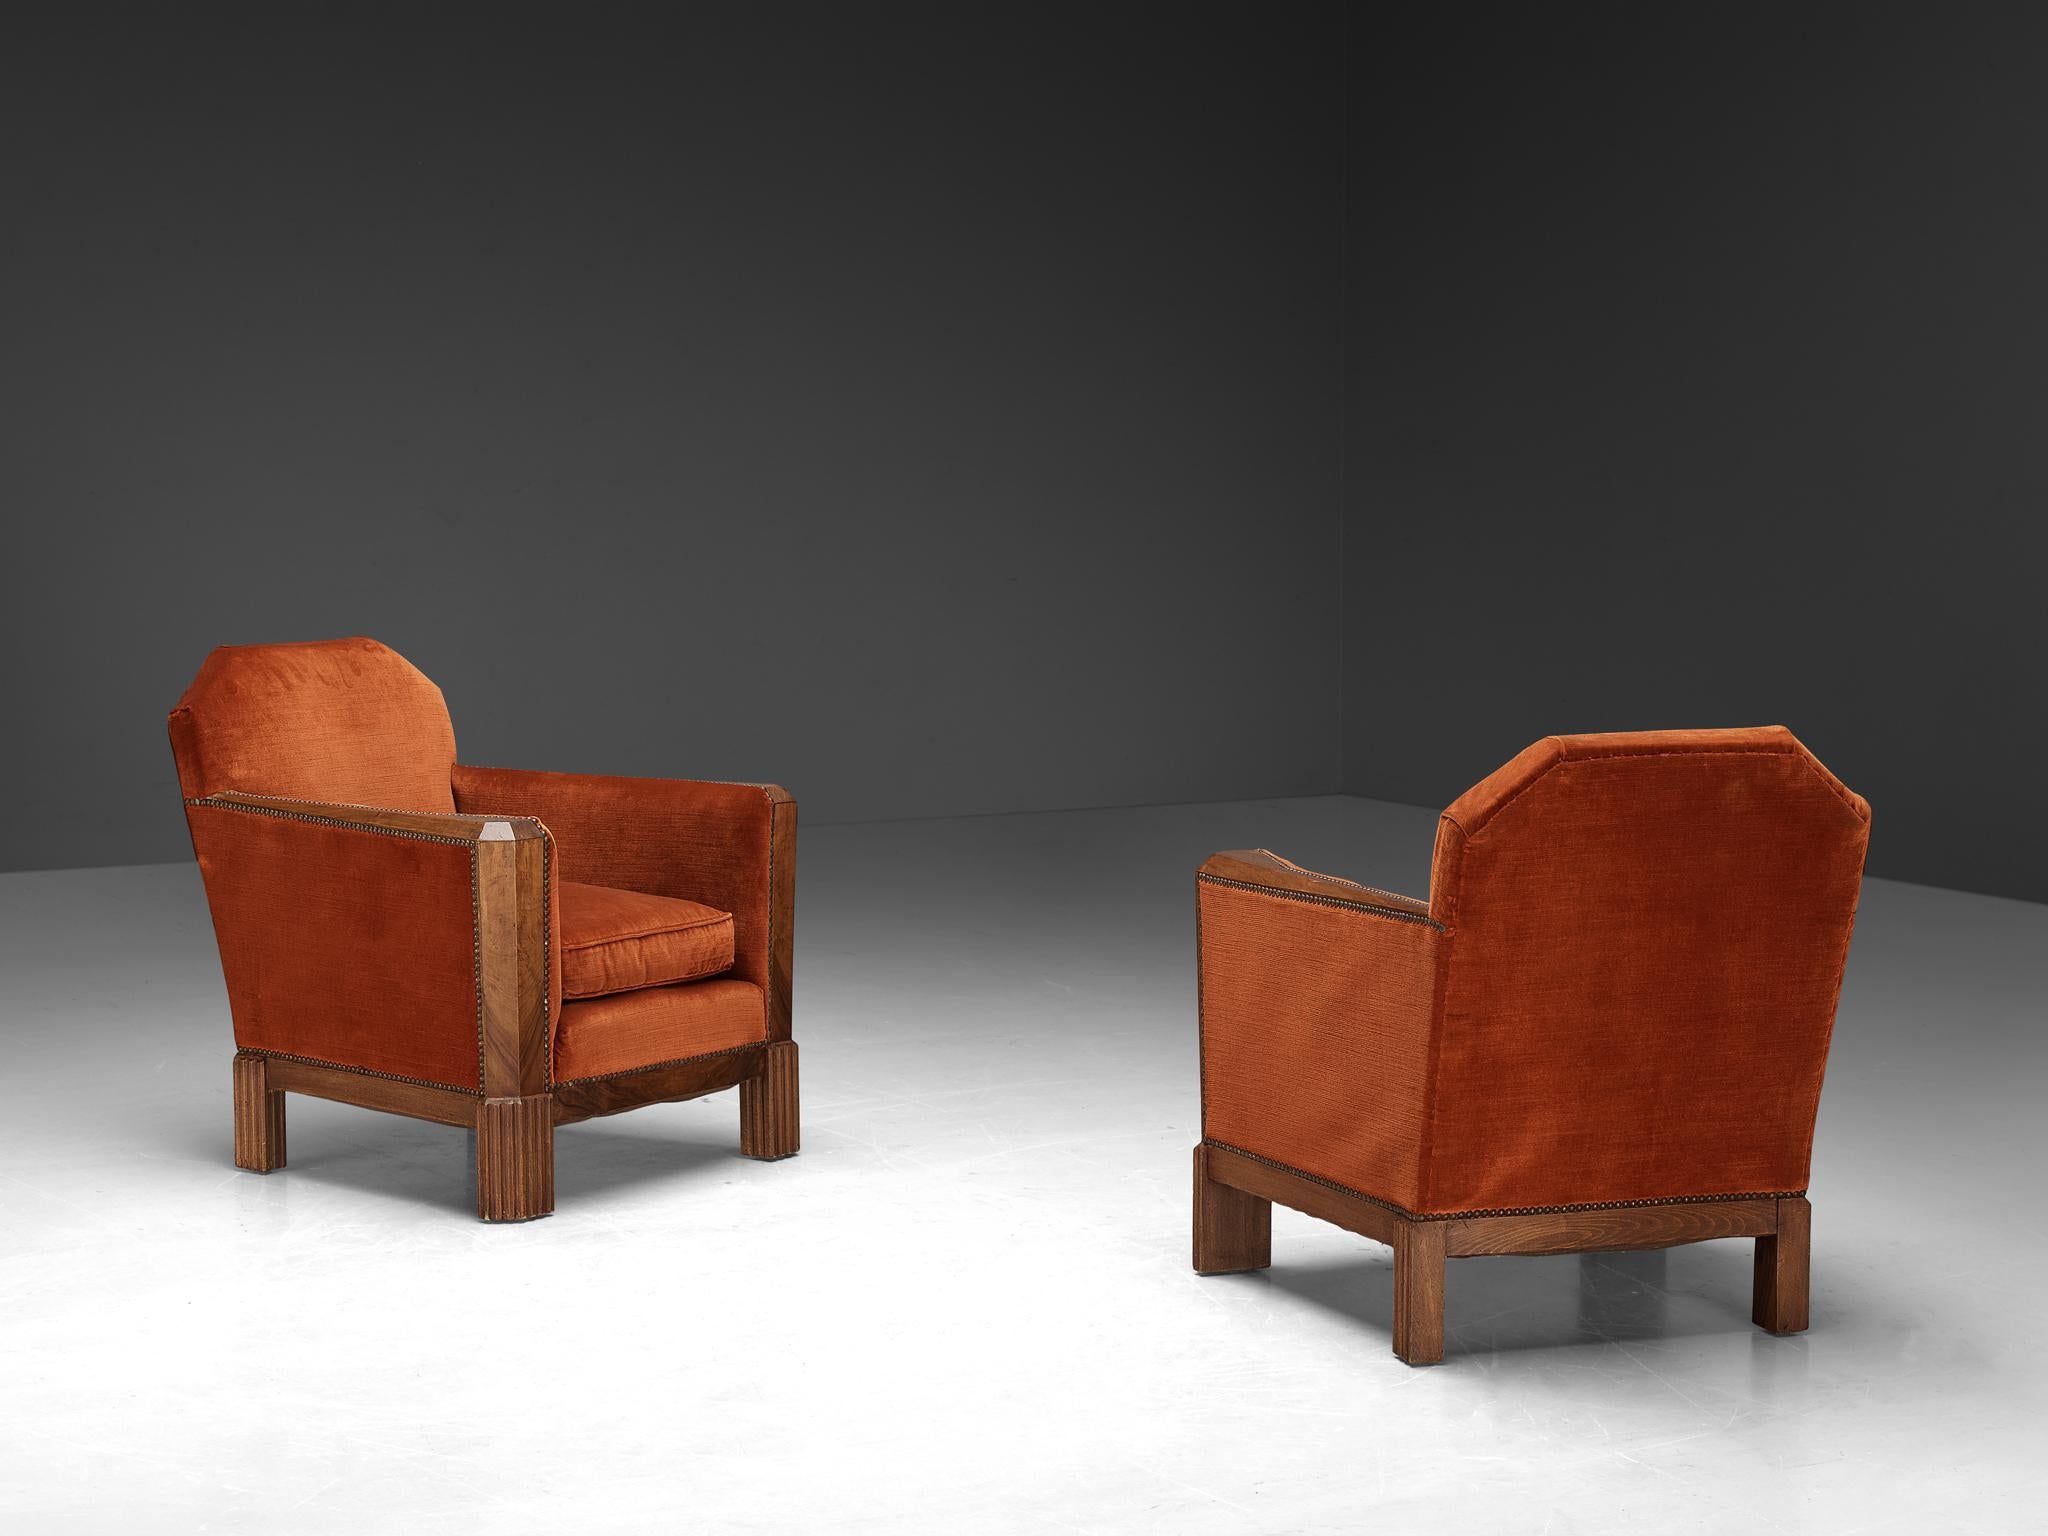 French Art Deco Pair of Lounge Chairs in Orange Corduroy and Walnut  For Sale 2